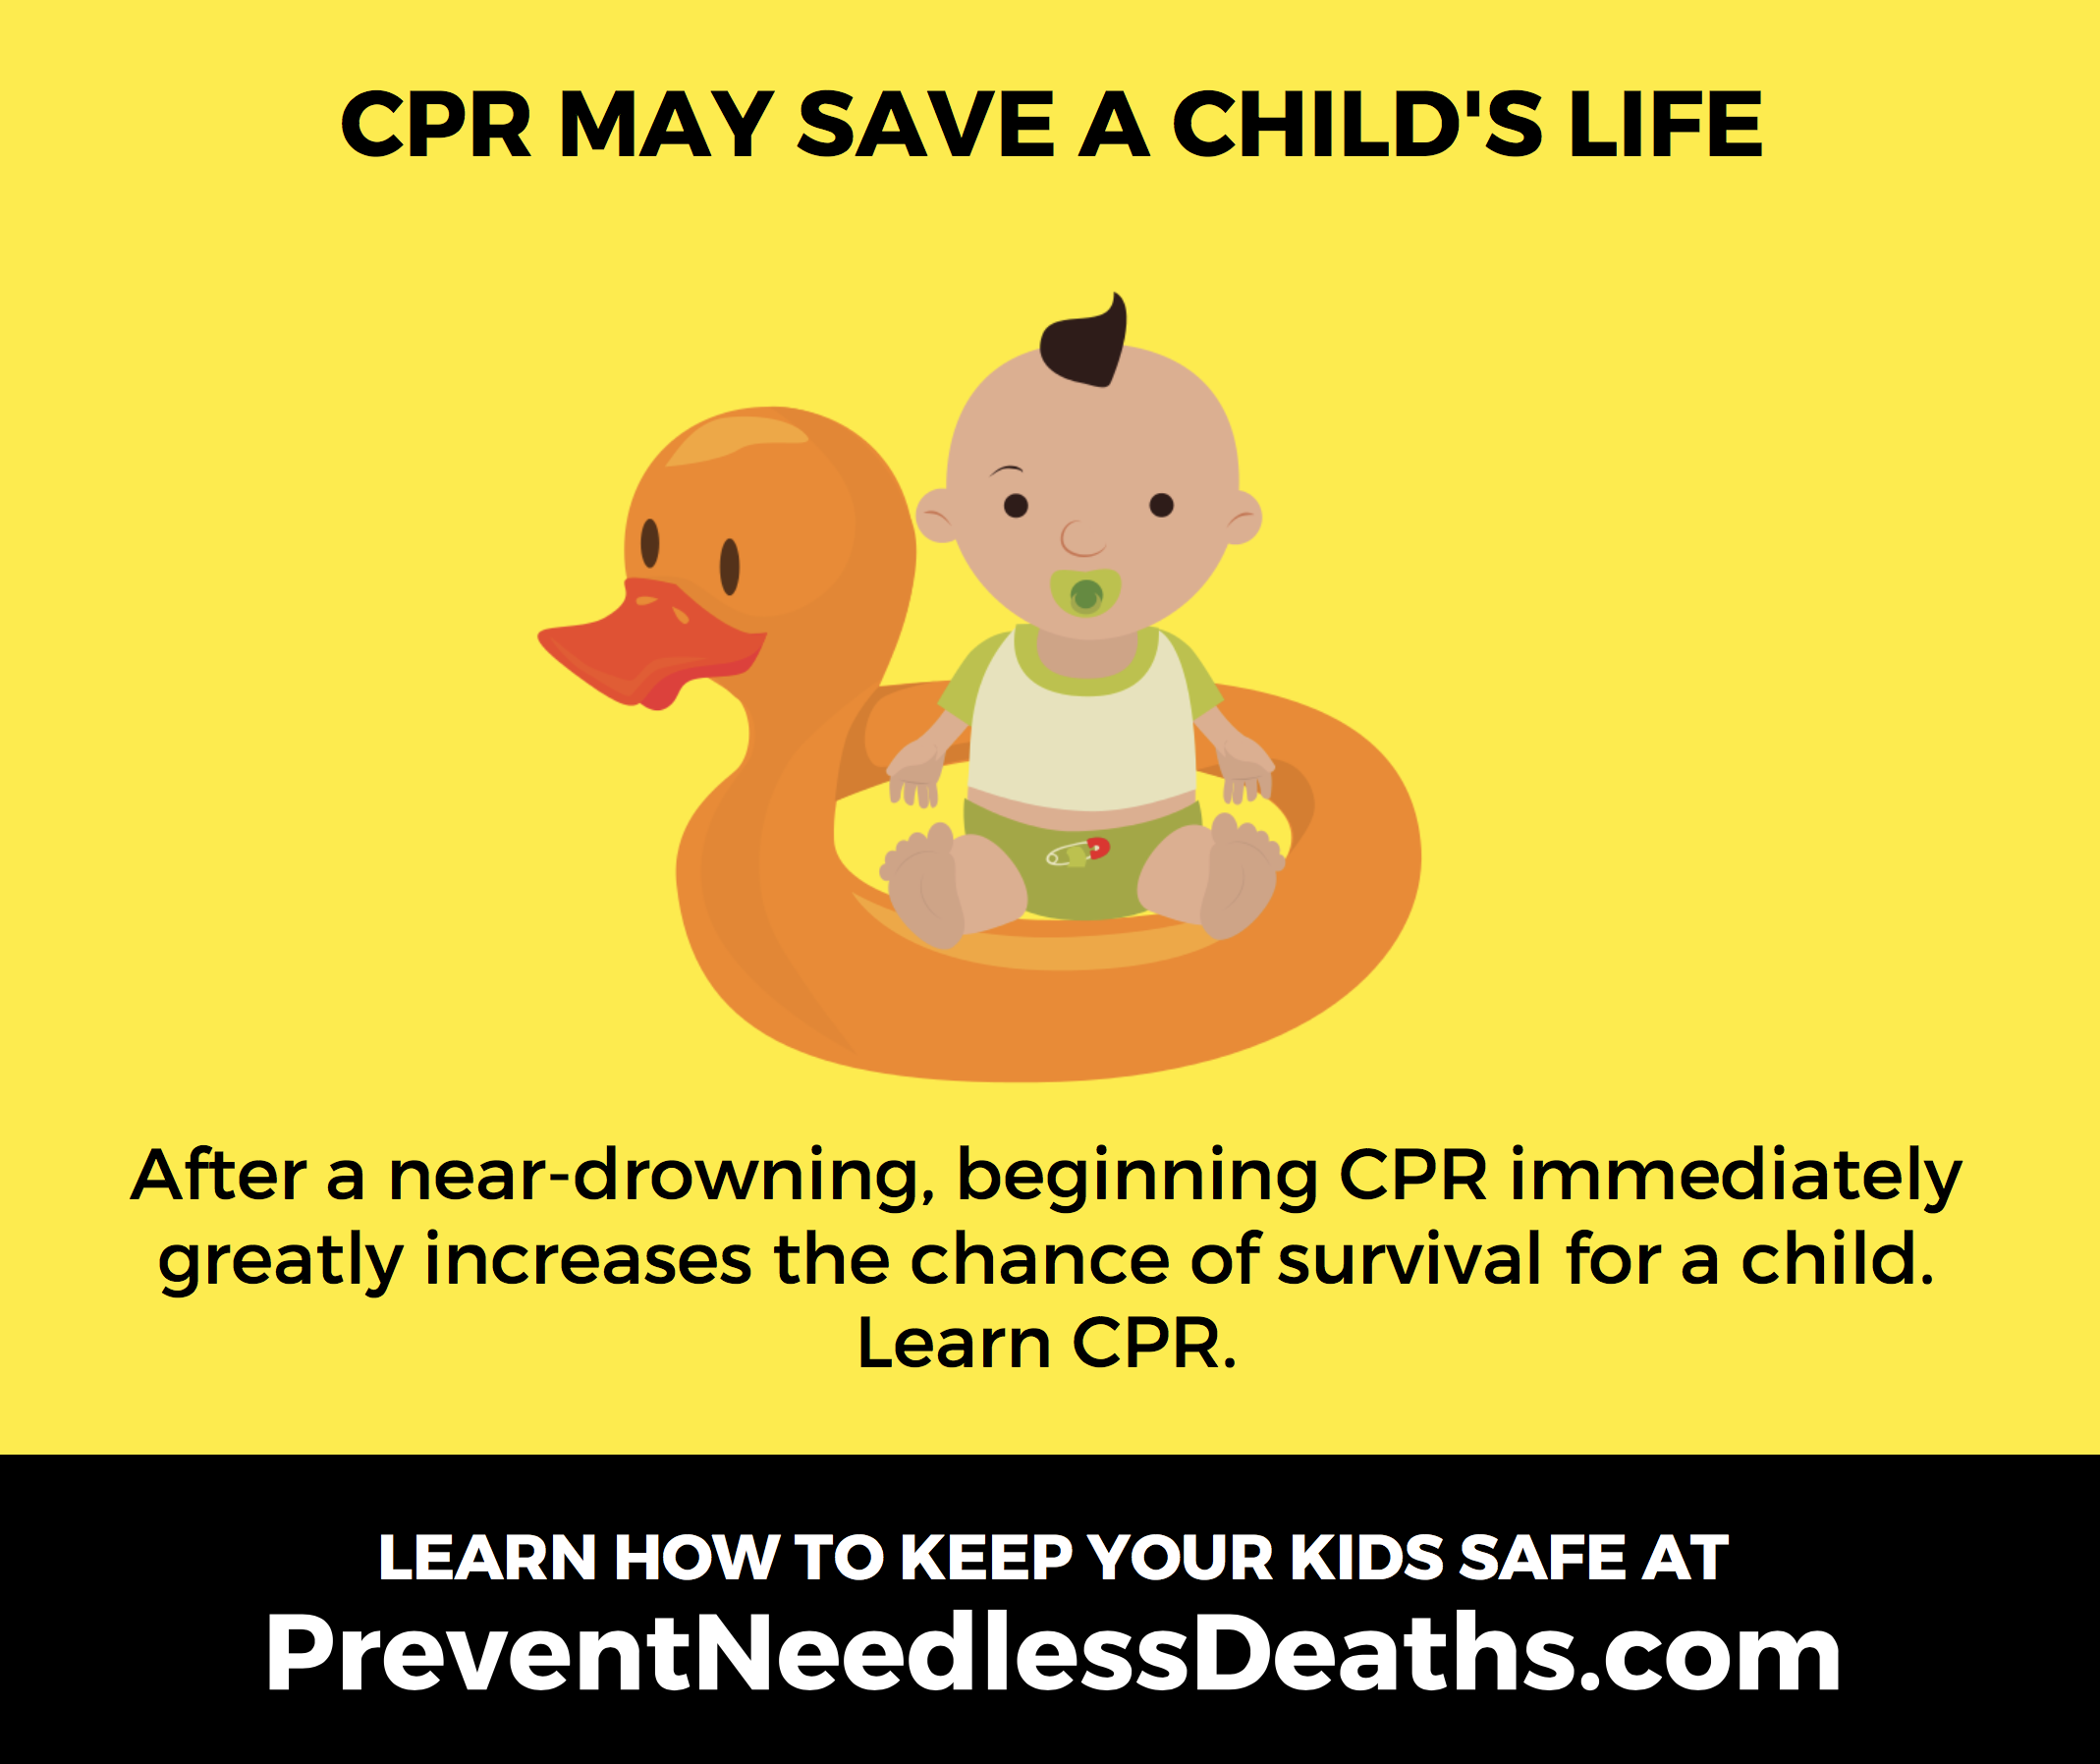 CPR may safe a child's life